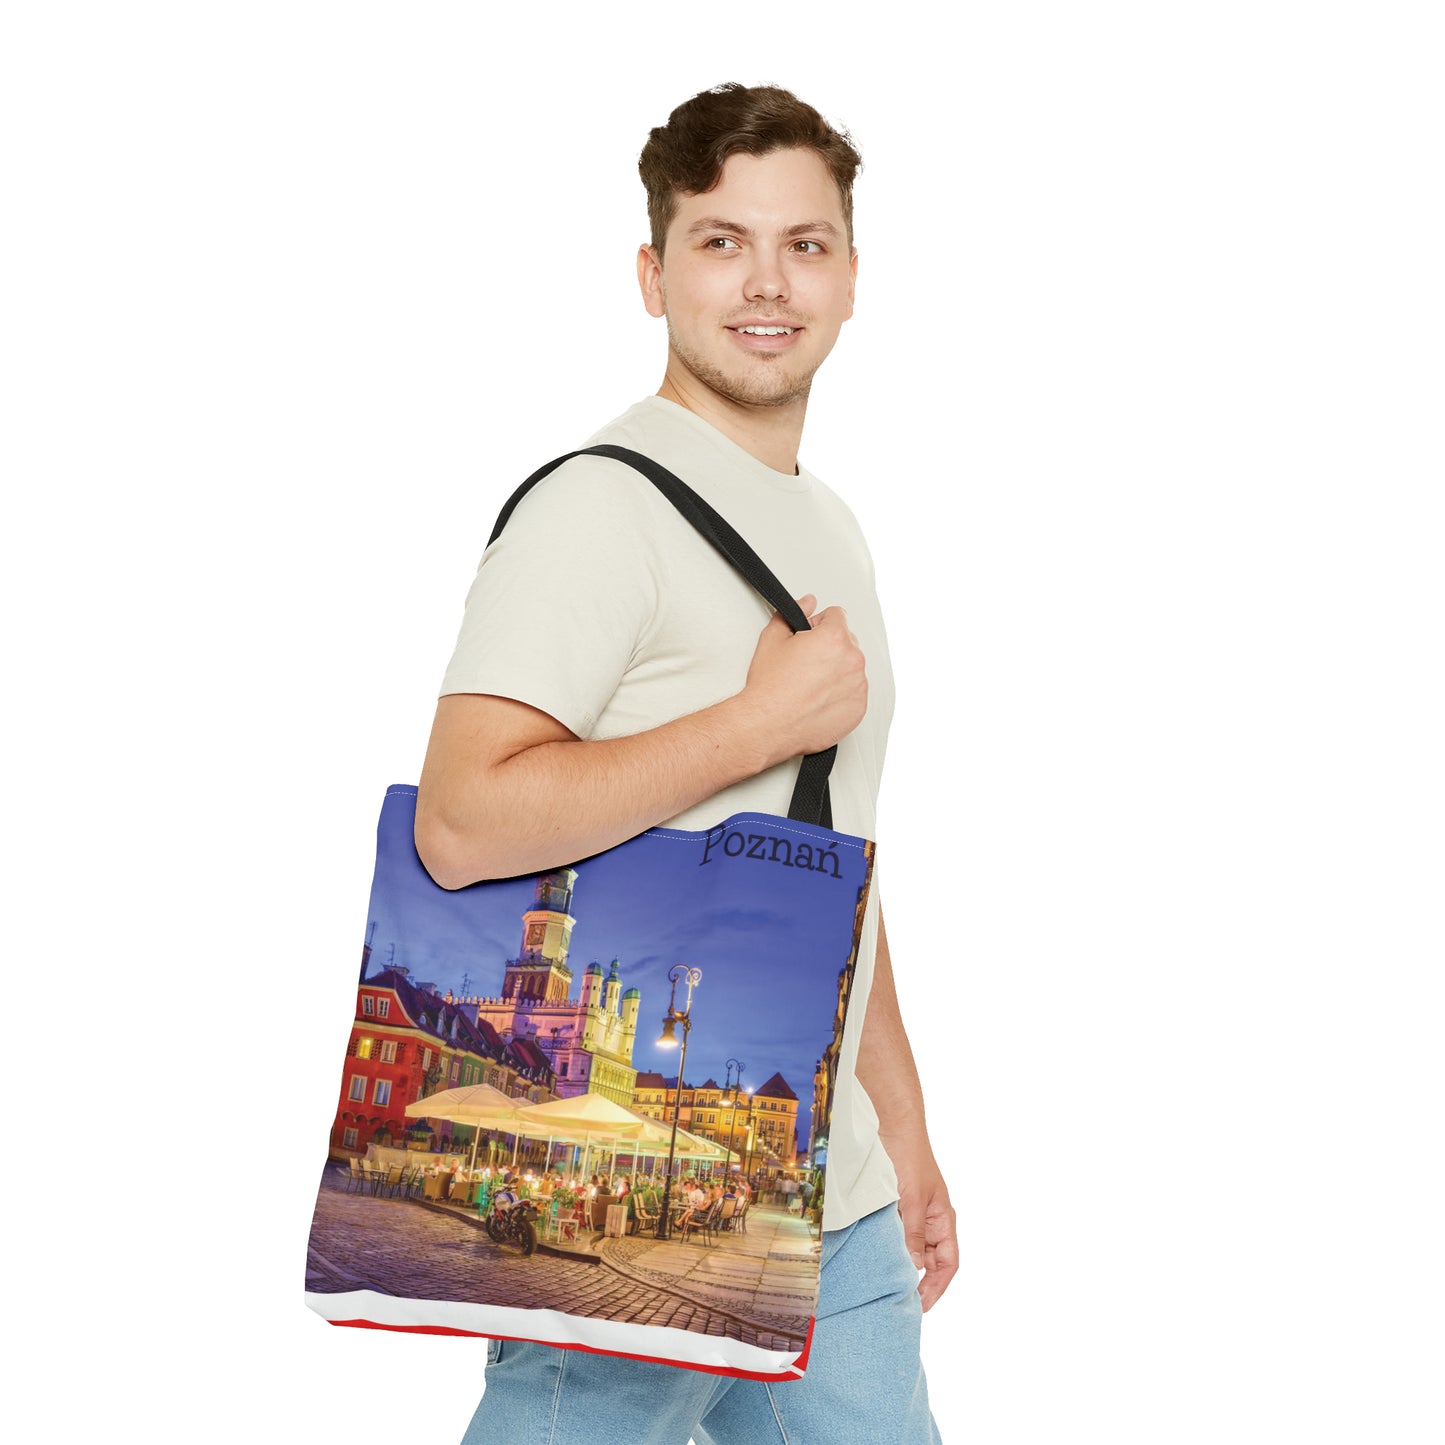 Poznan Poland Tote Bag (AOP) Perfect Gift Double Sided